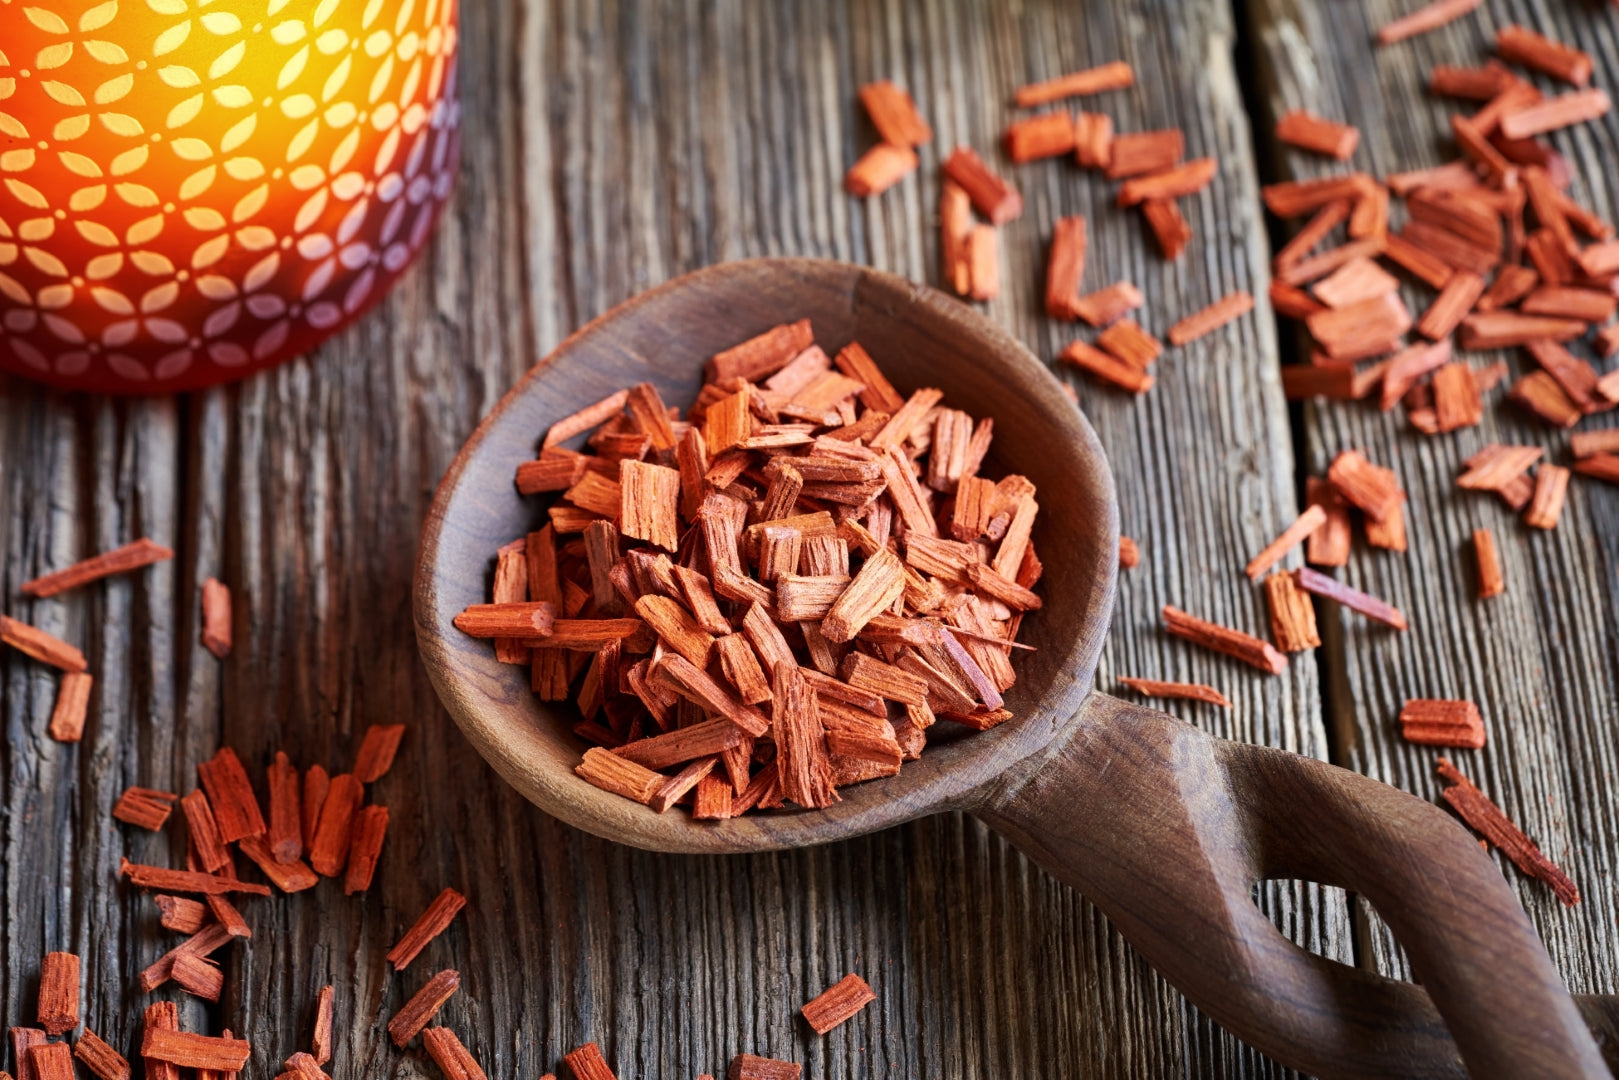 A few red woods chips in a wooden bowl on a wooden background.